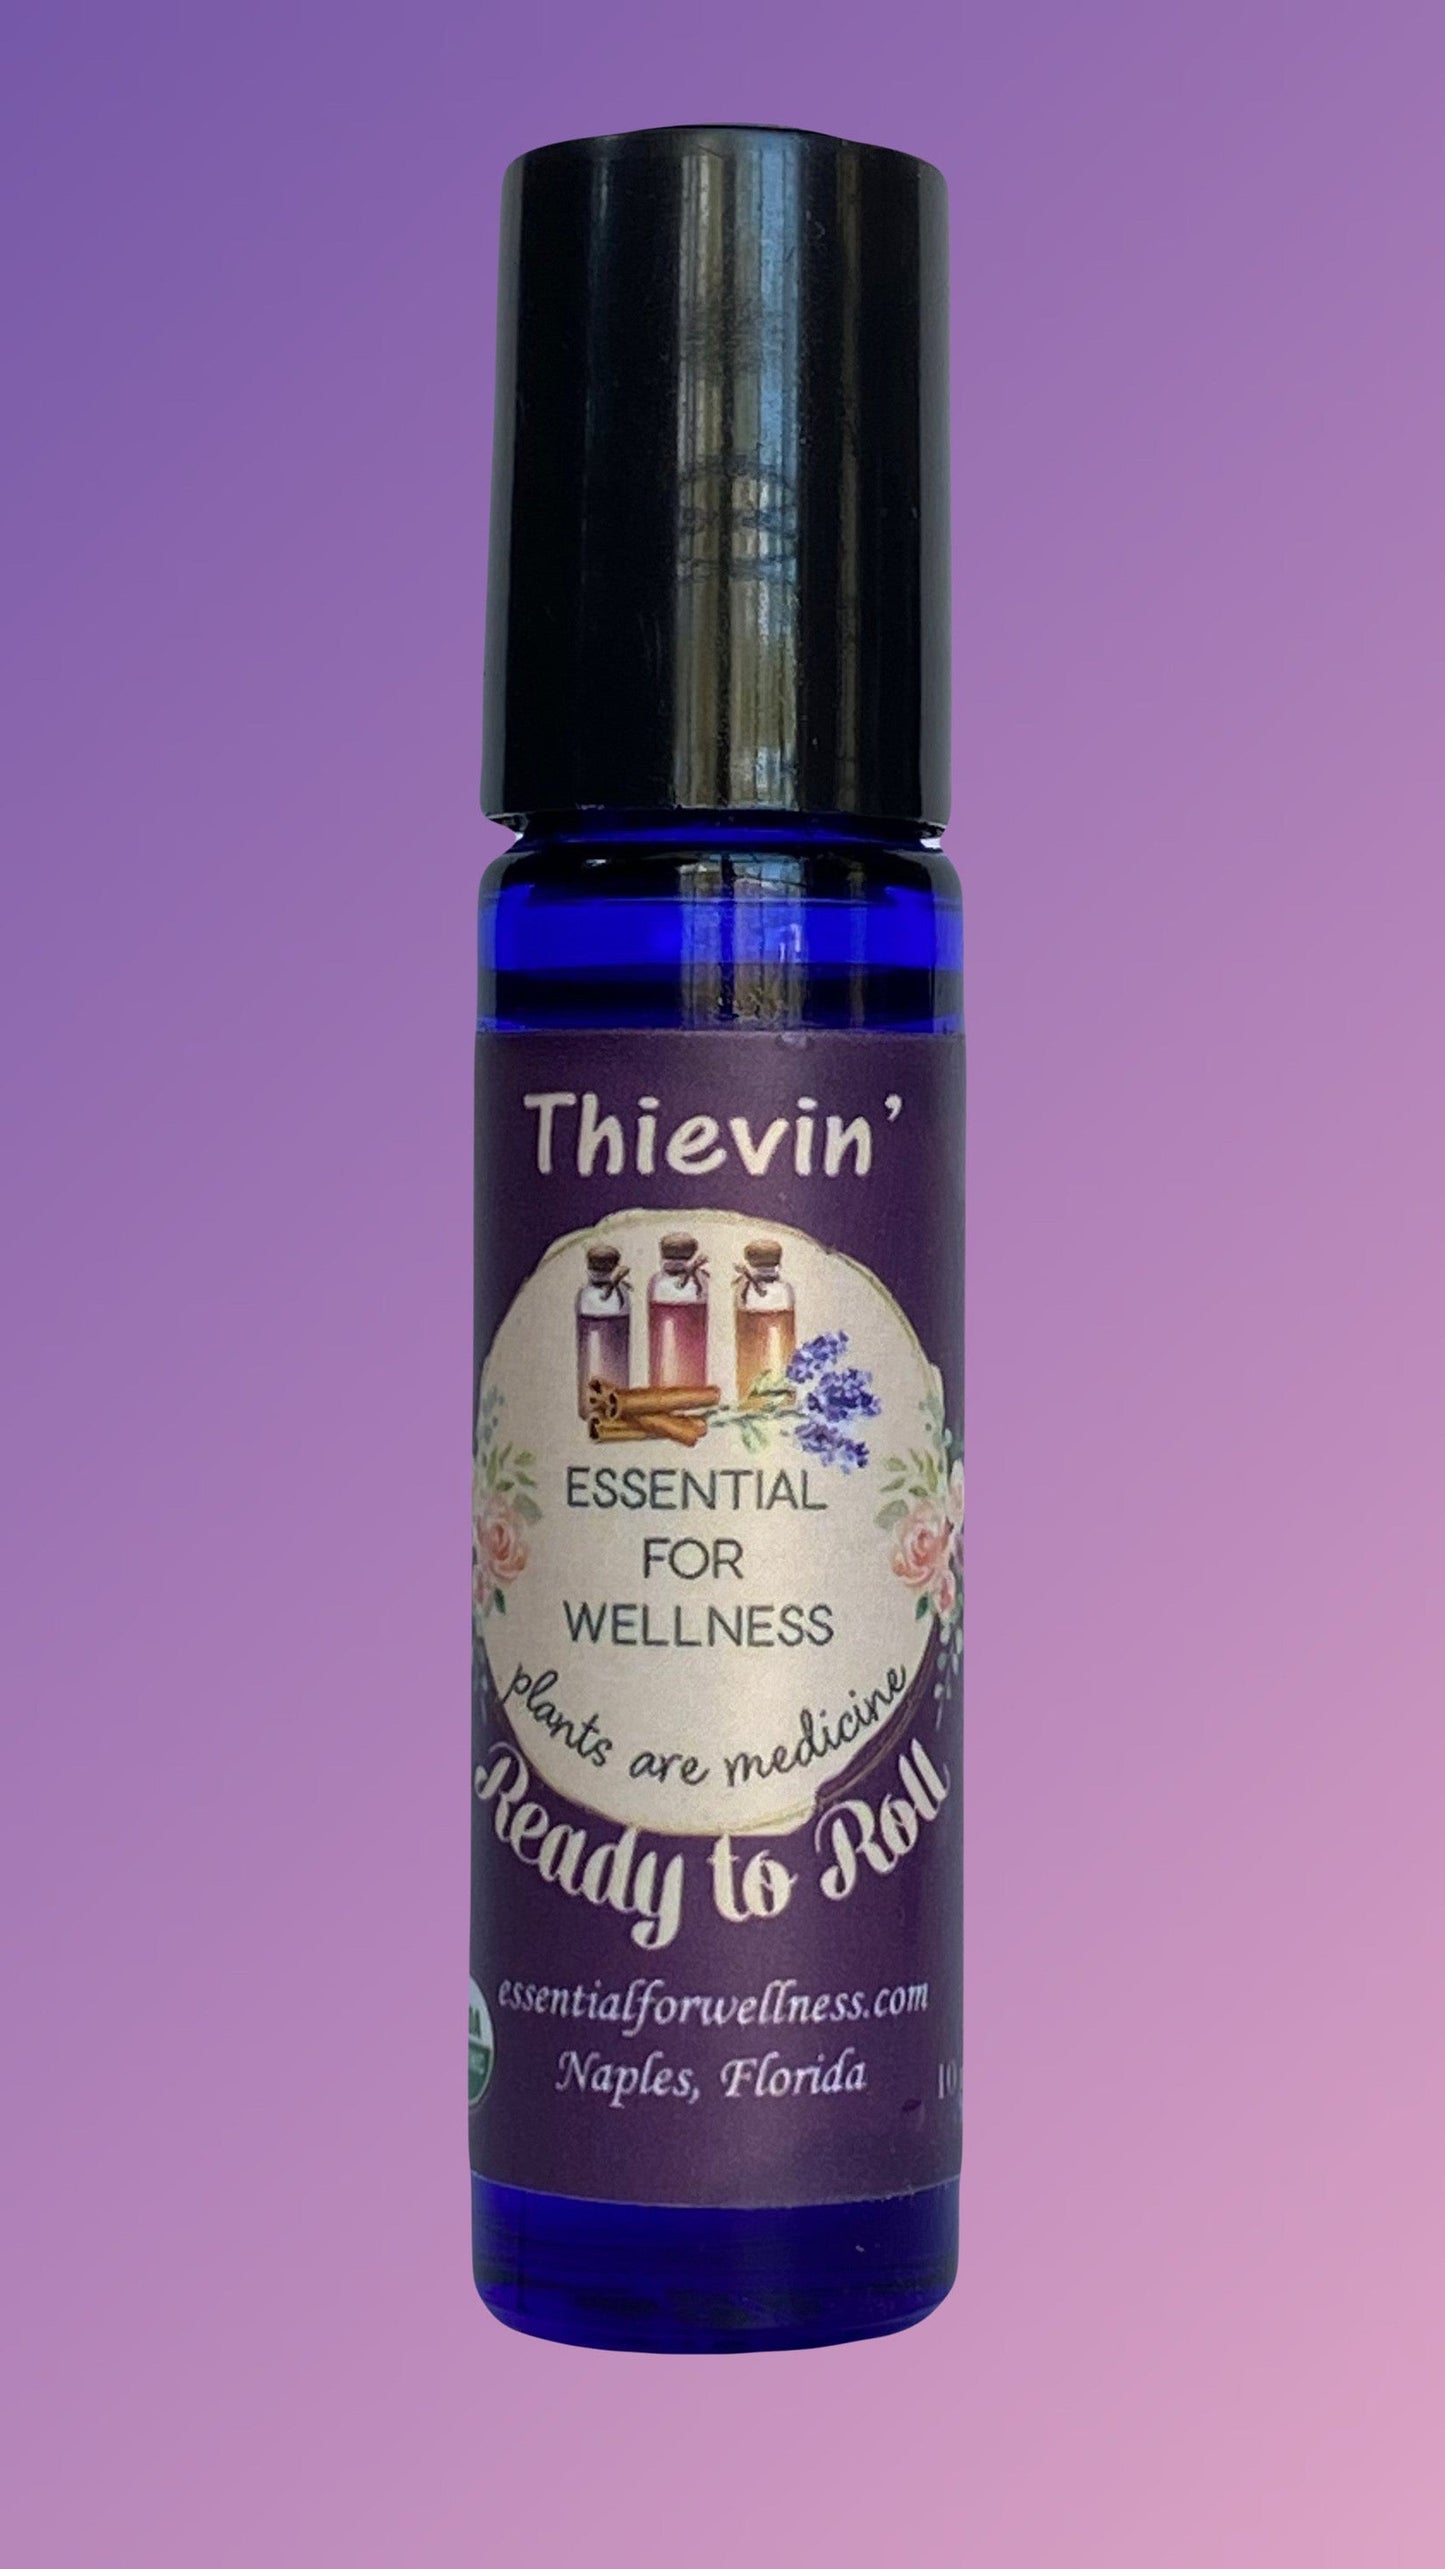 Ready to Roll® Thievin' (Thieves) Organic Essential Oil Blend